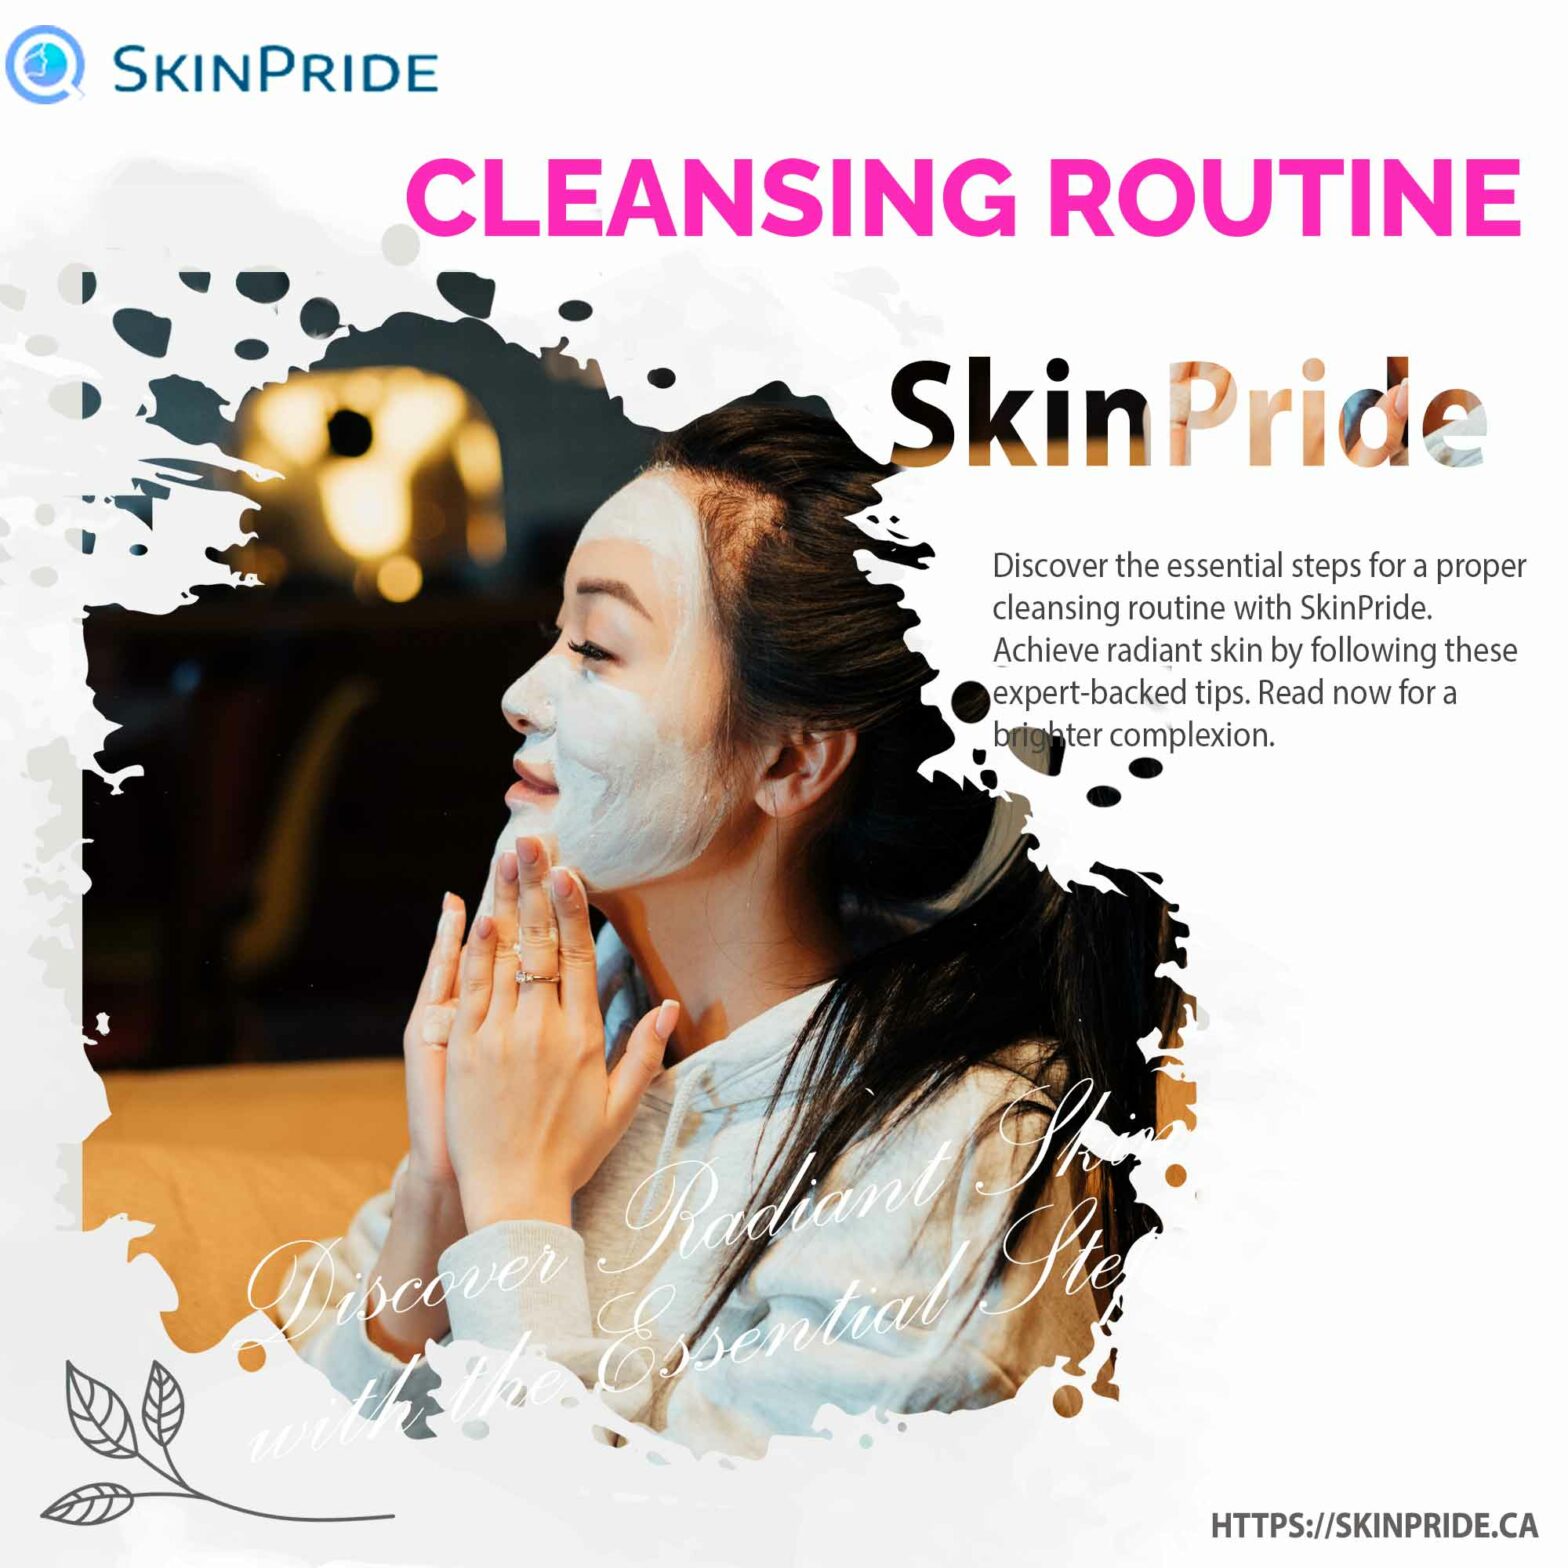 Discover the essential steps for a proper cleansing routine with SkinPride. Achieve radiant skin by following these expert-backed tips. Read now for a brighter complexion.SkinPride